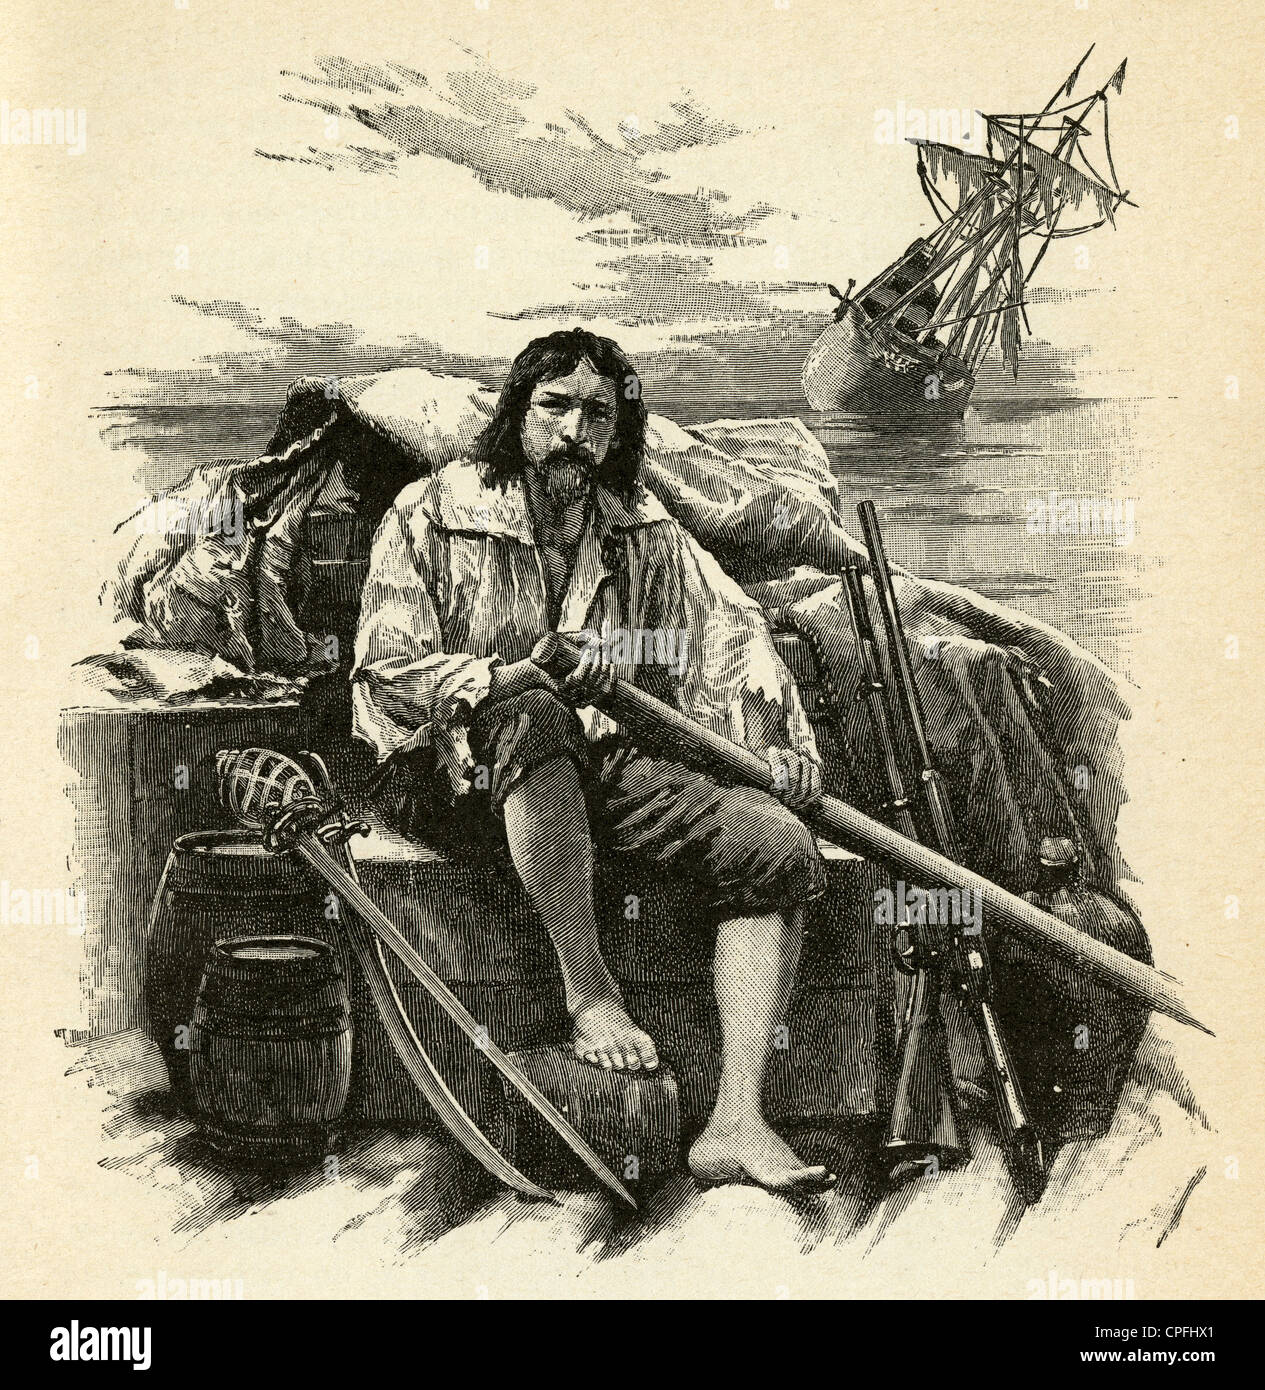 1910s engraving from Robinson Crusoe by Daniel Defoe: "With this cargo I put to sea." Illustrated by Walter Paget. Stock Photo